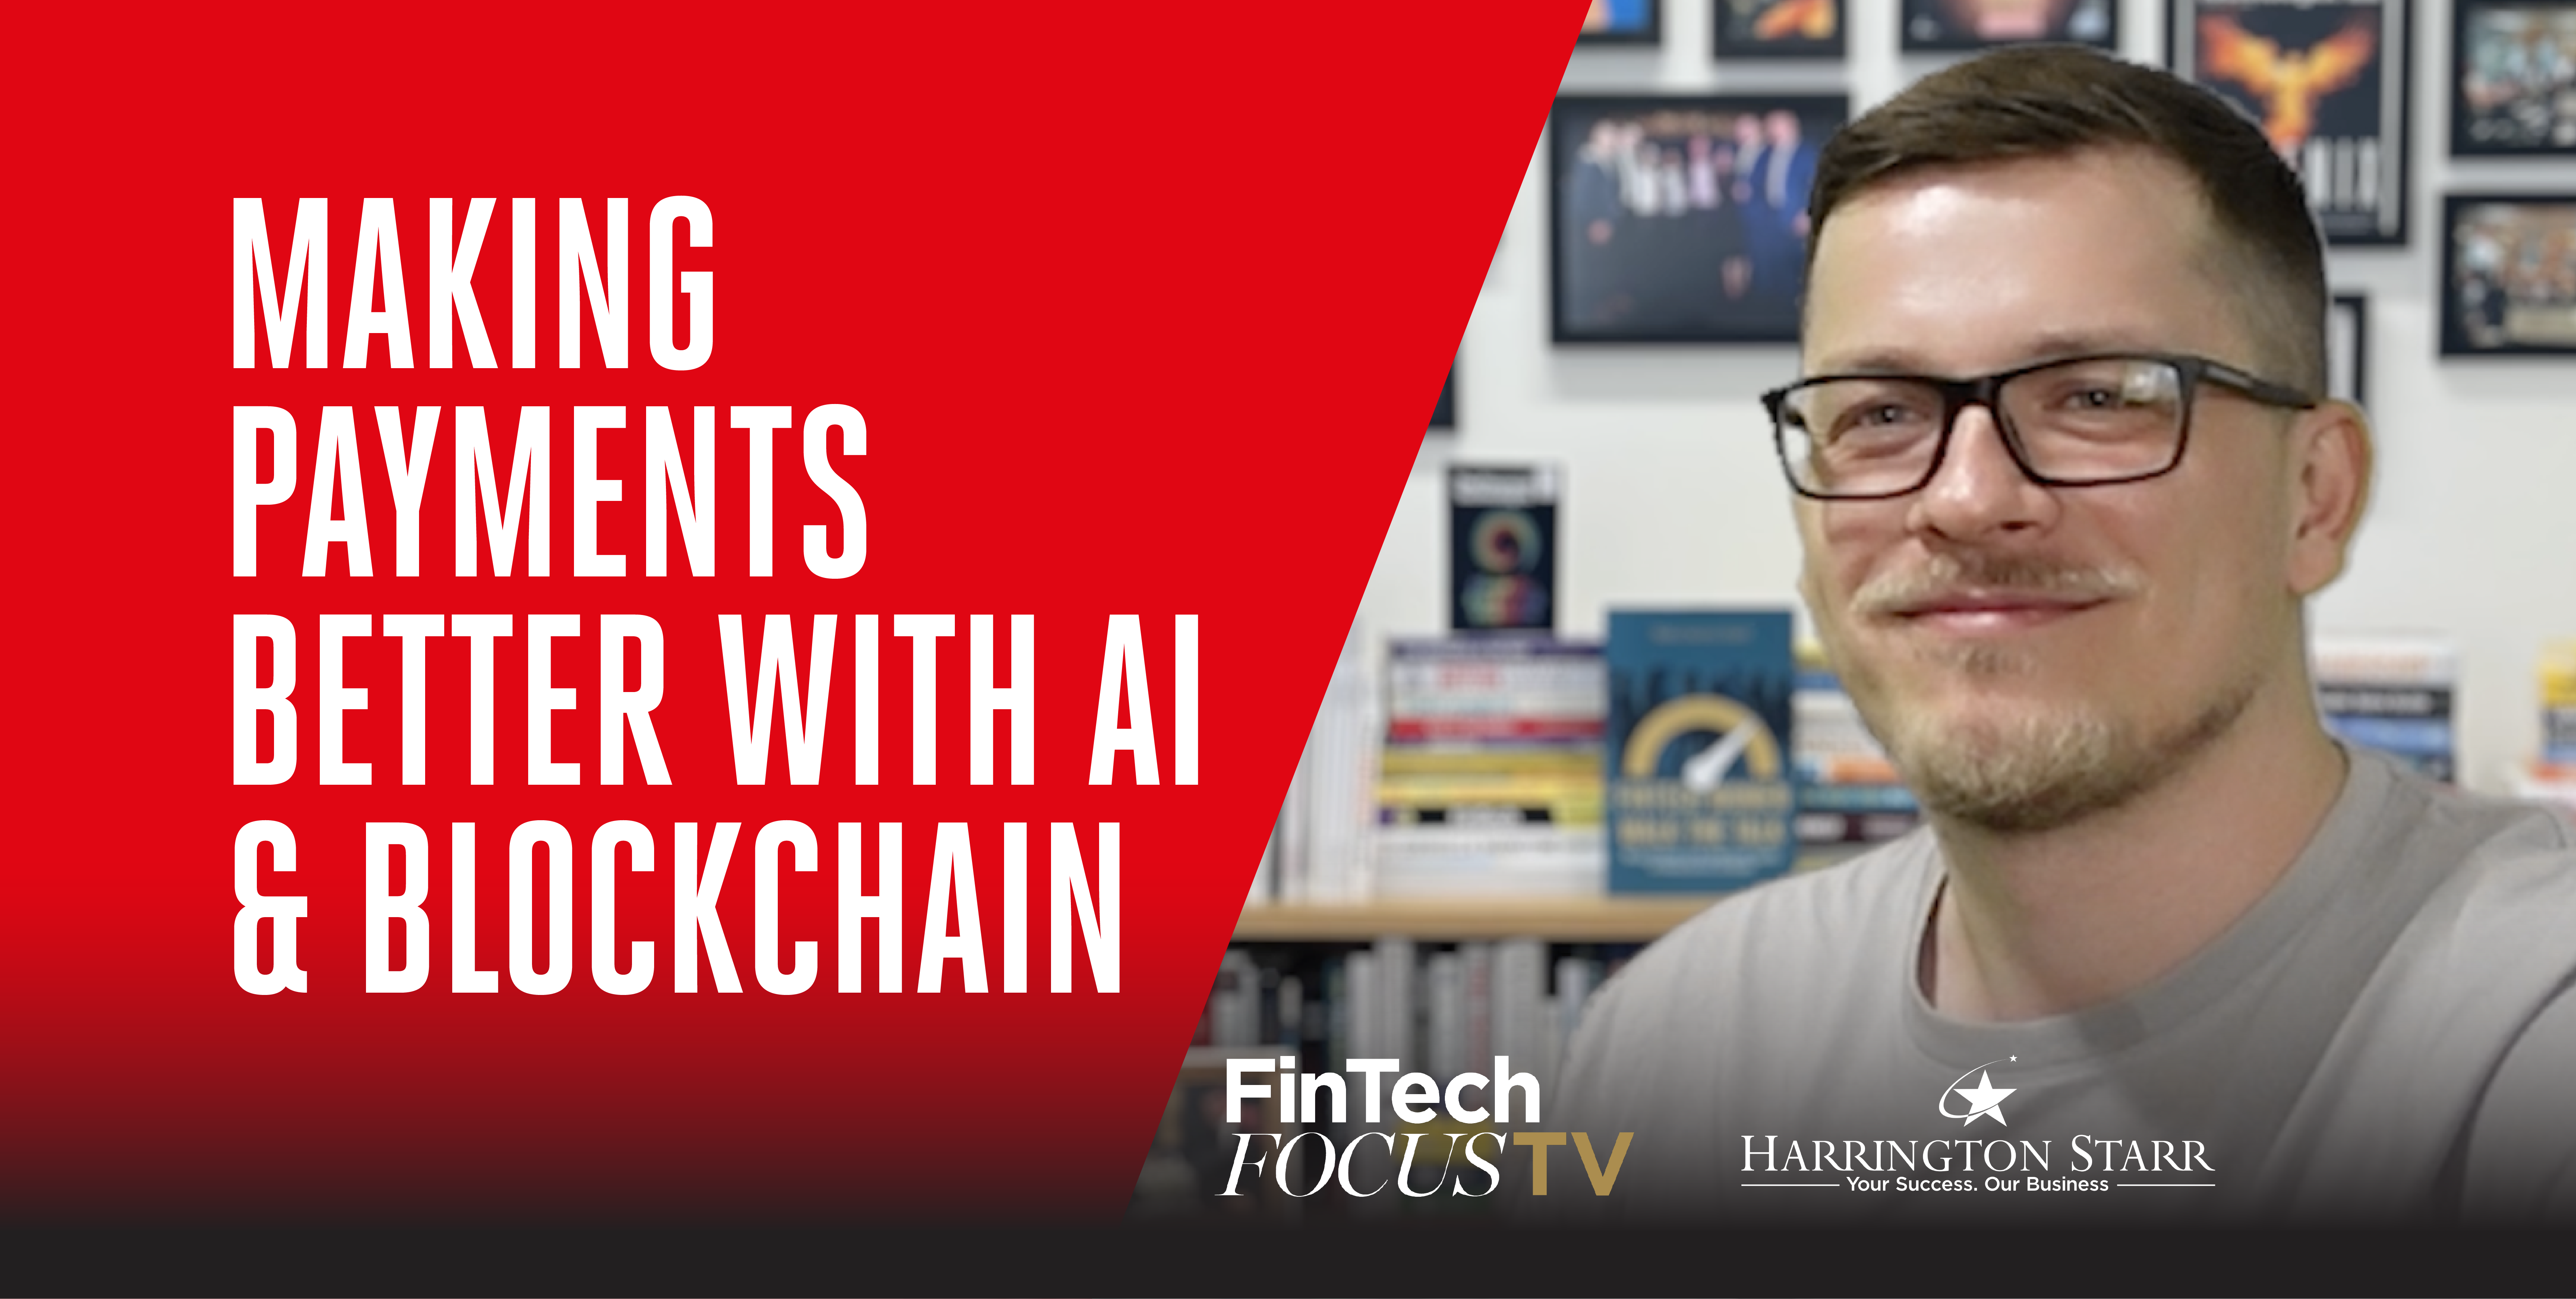 Making Payments Better with AI & Blockchain